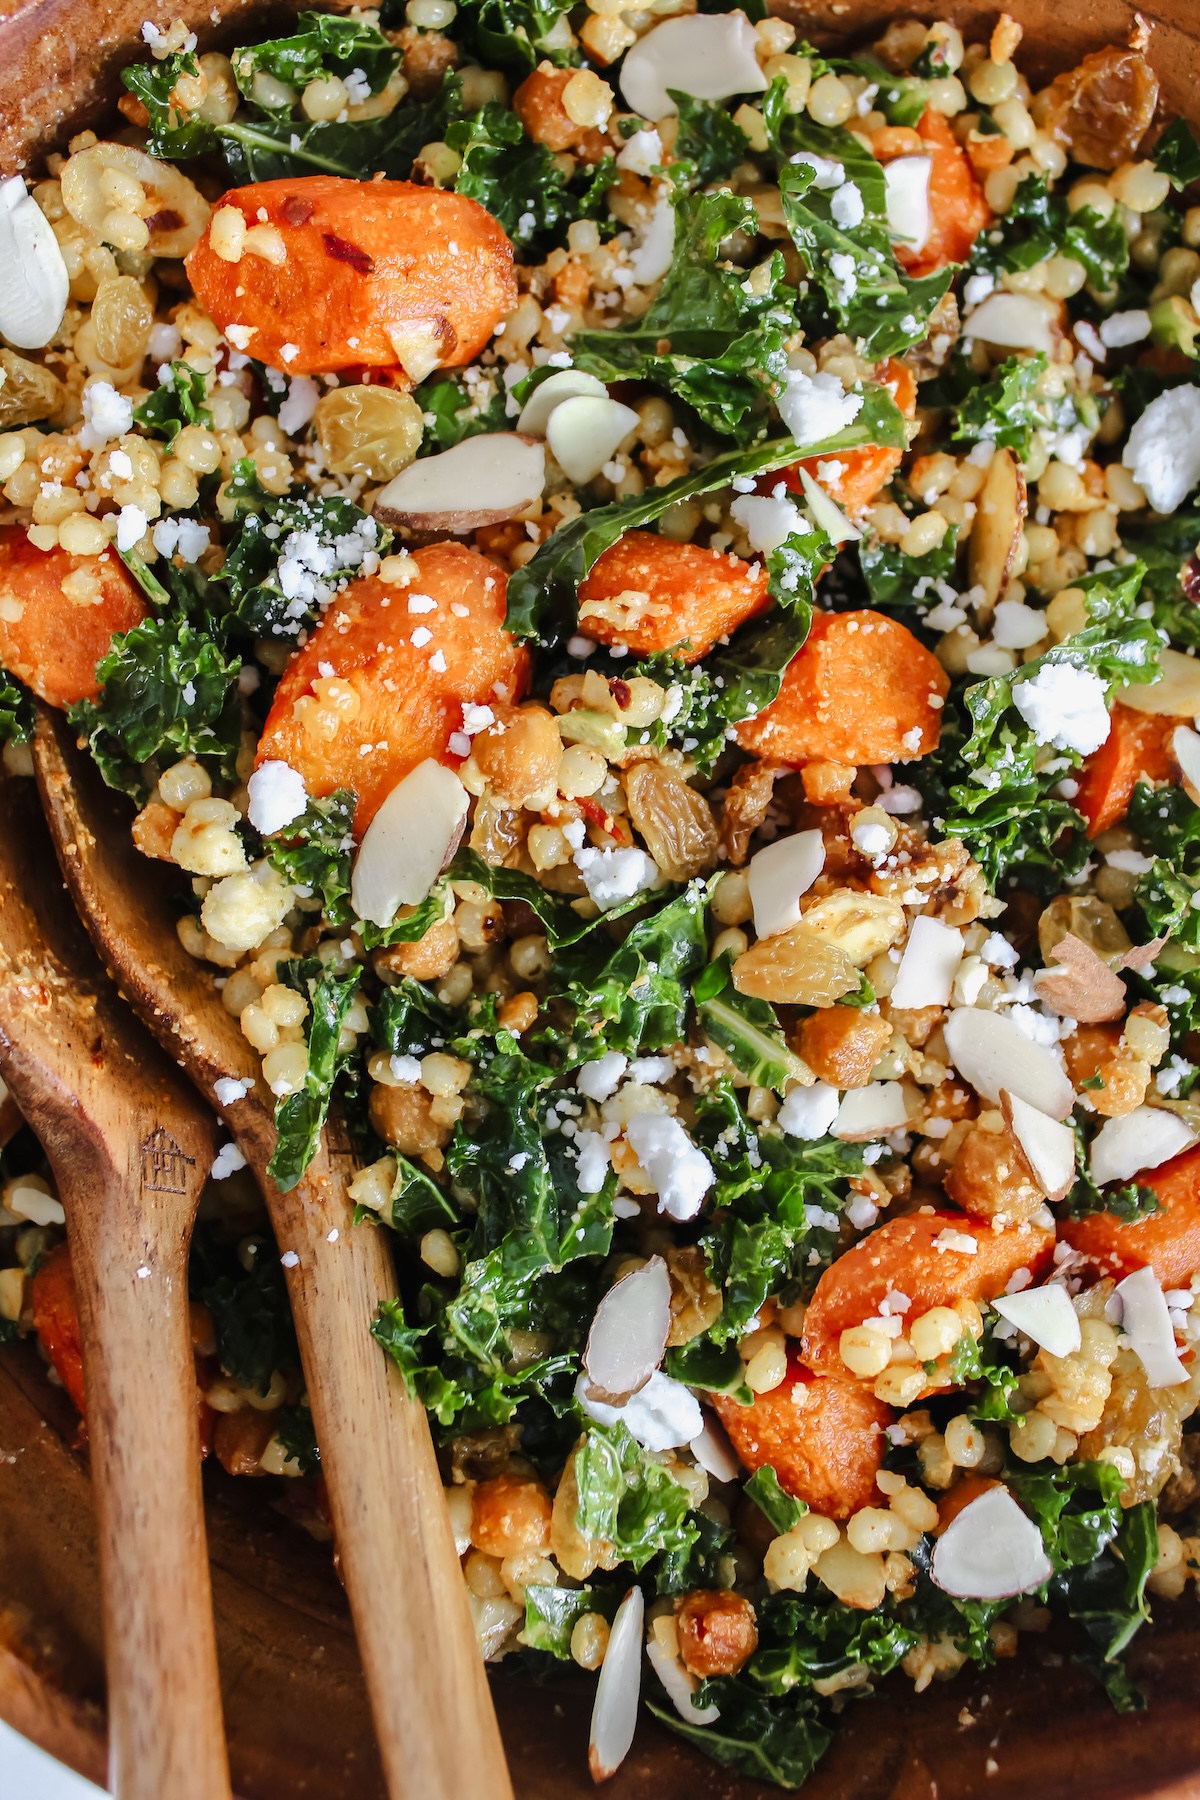 Harissa Roasted Carrots and Chickpeas Couscous Salad in a wooden bowl with wooden spoons